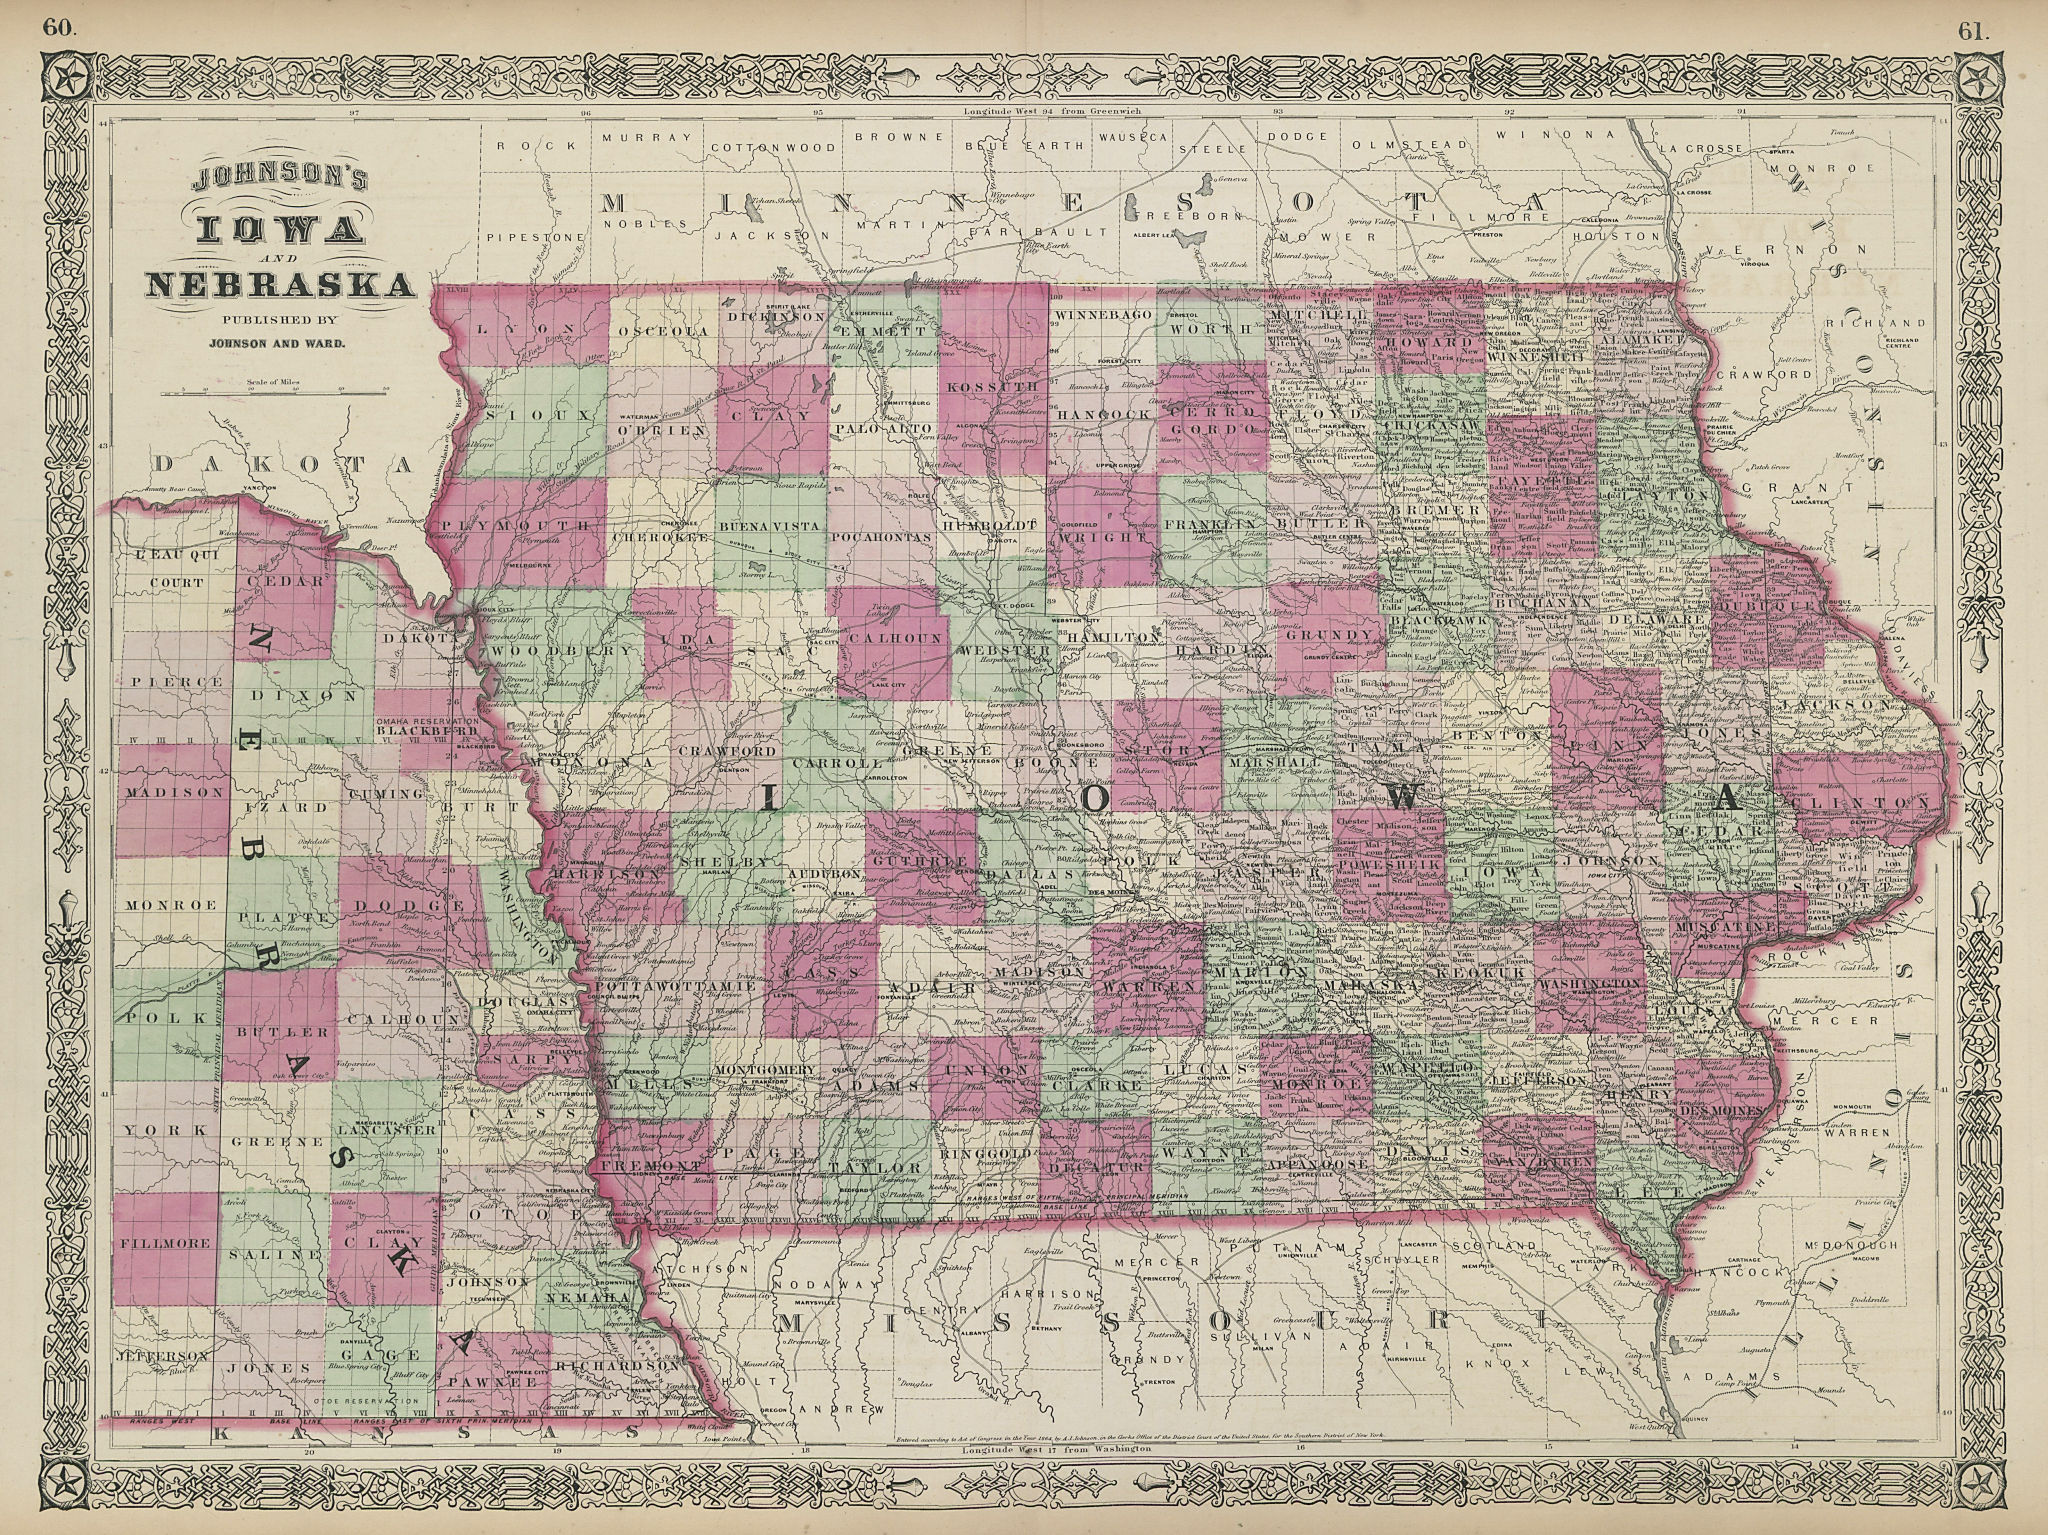 Associate Product Johnson's Iowa & Nebraska. US state map showing counties 1865 old antique